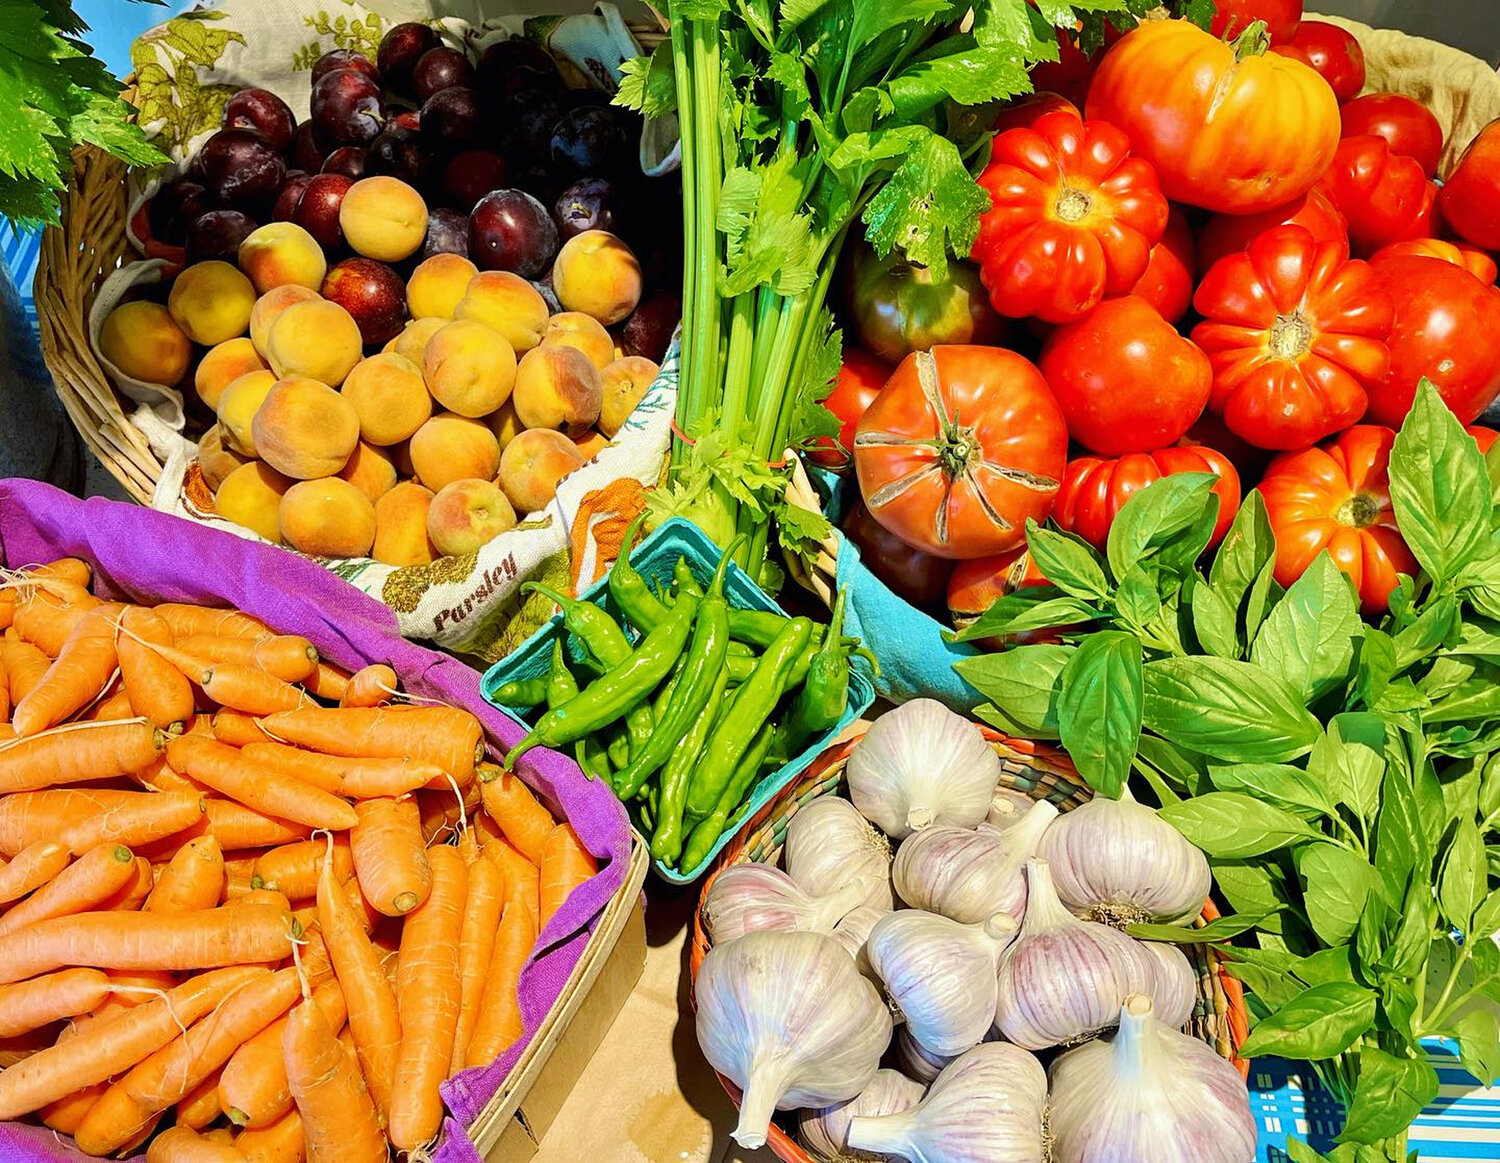 Fruits and veggies at Madrid's The Village Greengrocer will stay fresher and crisper thanks to new cold storage bought with a grant from the Regional Development Corporation.